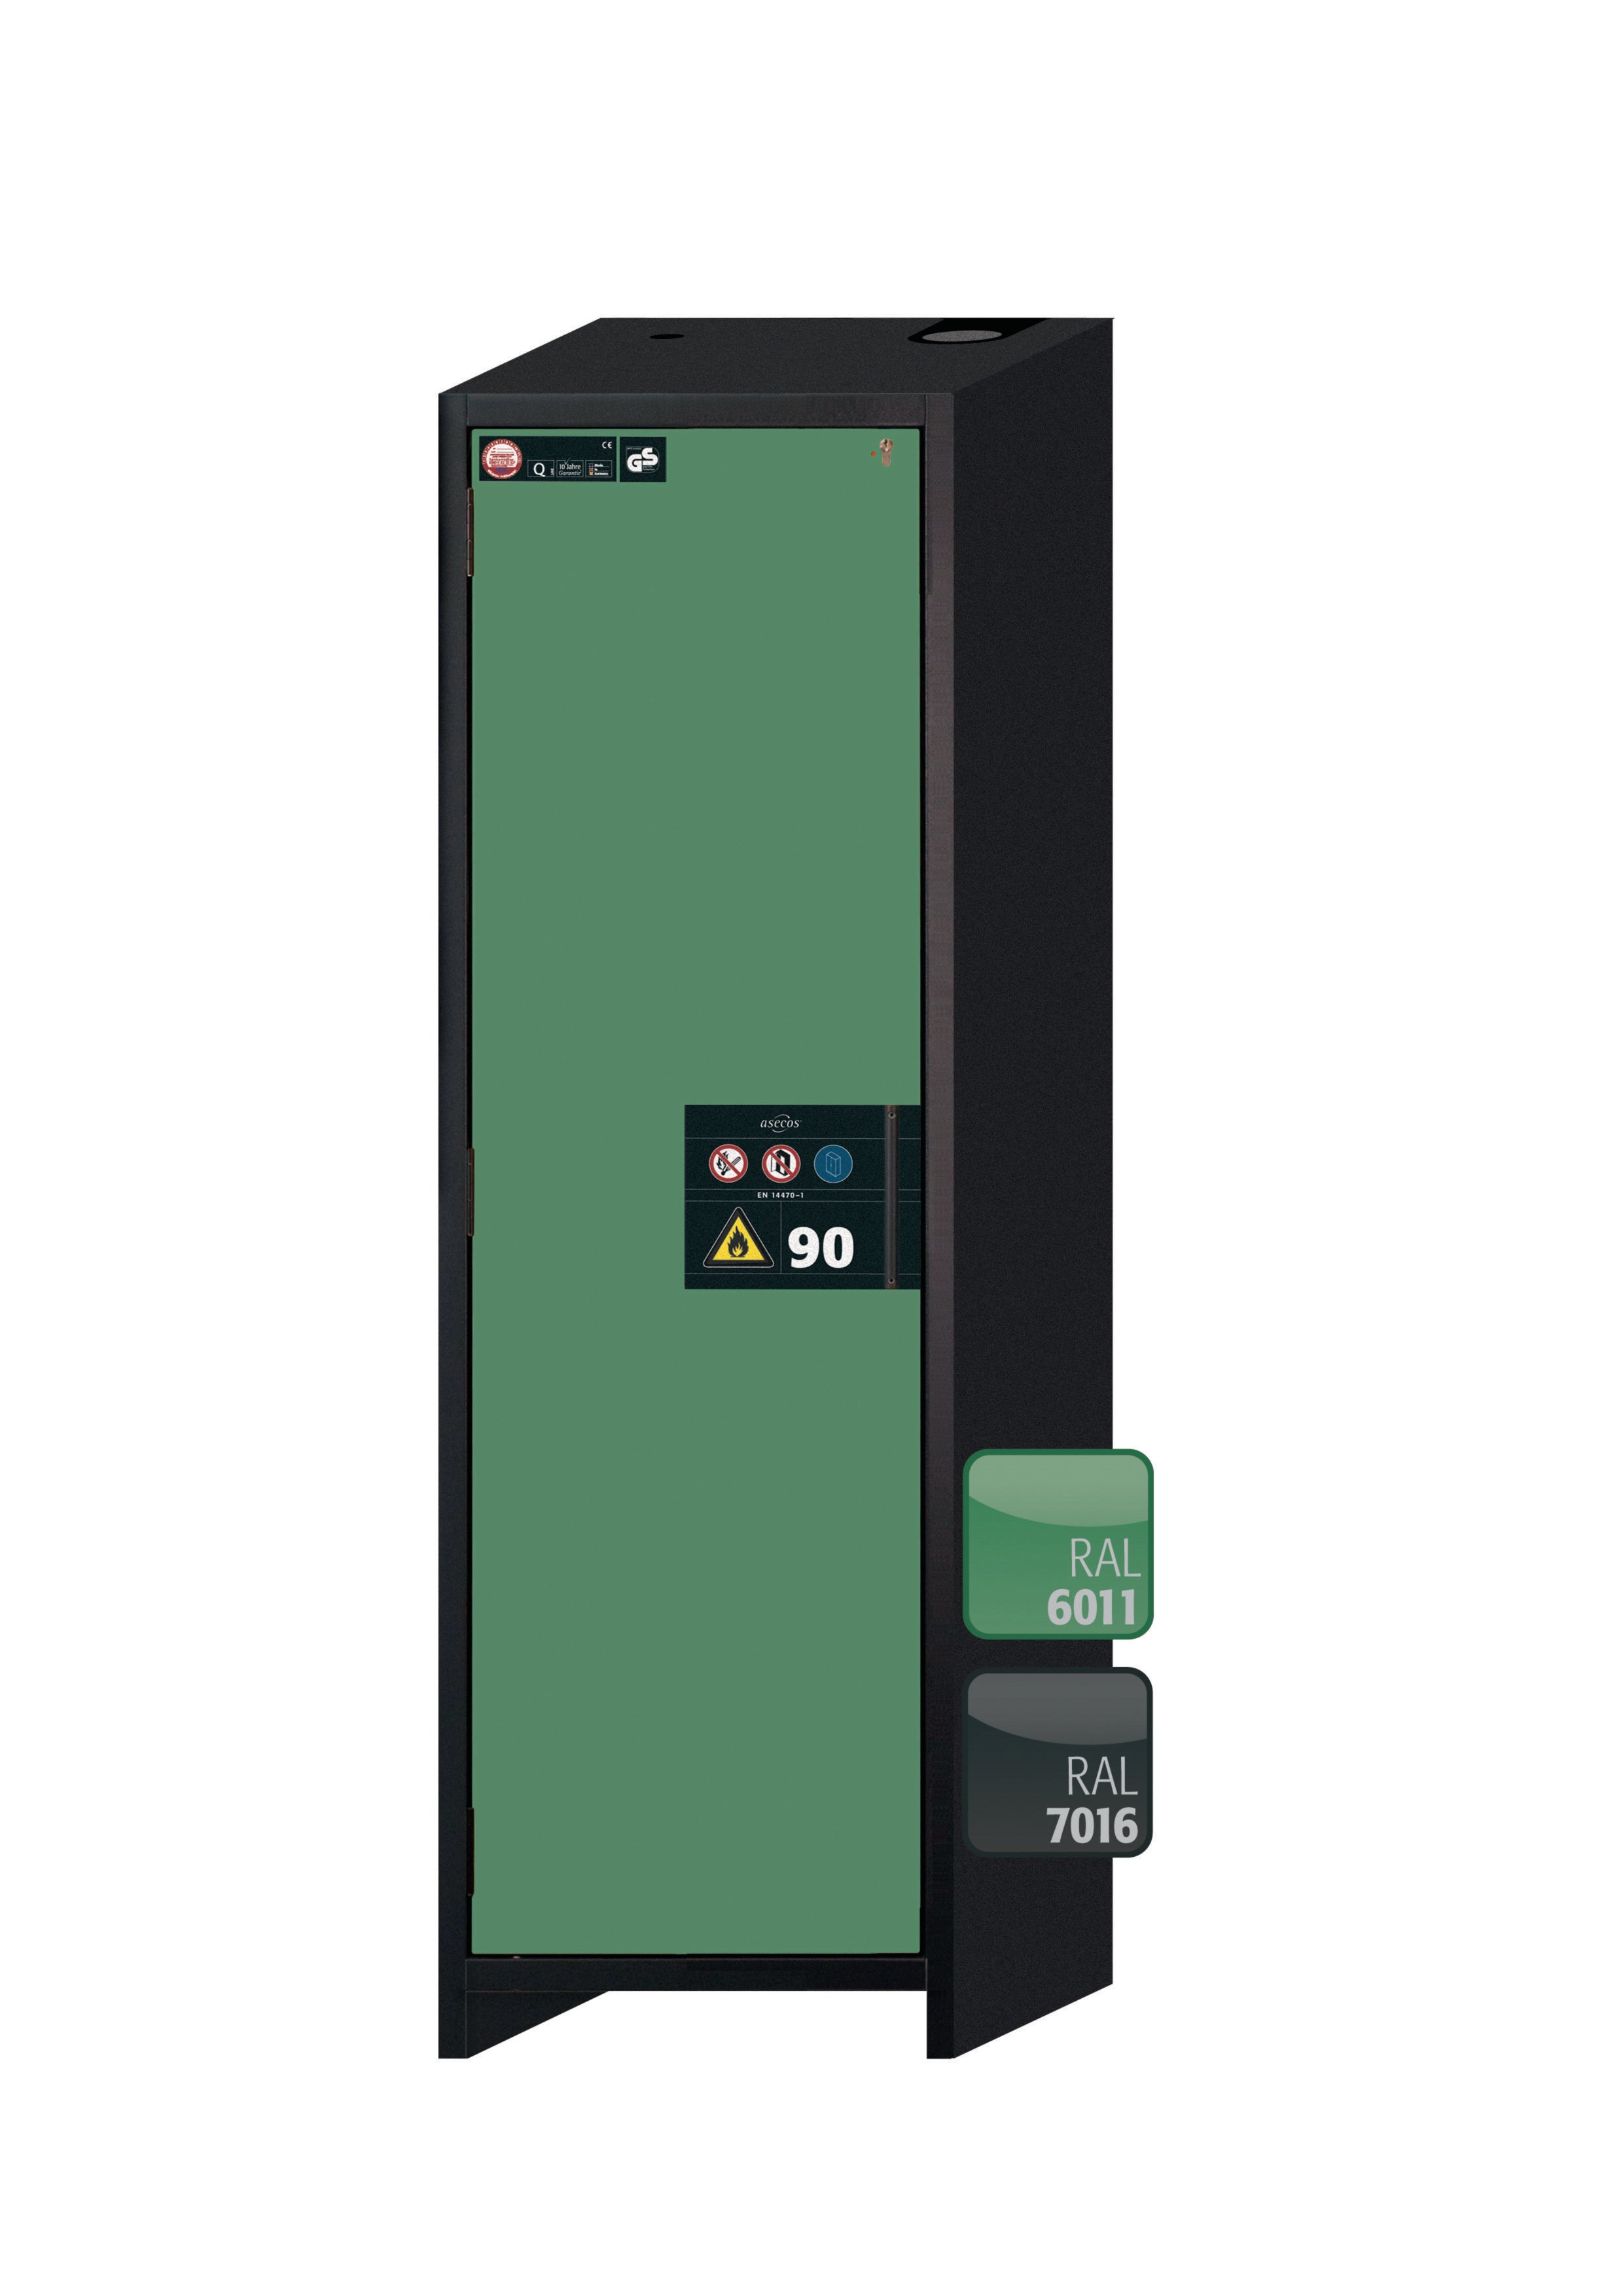 Type 90 safety storage cabinet Q-CLASSIC-90 model Q90.195.060 in reseda green RAL 6011 with 2x tray shelf (standard) (polypropylene),